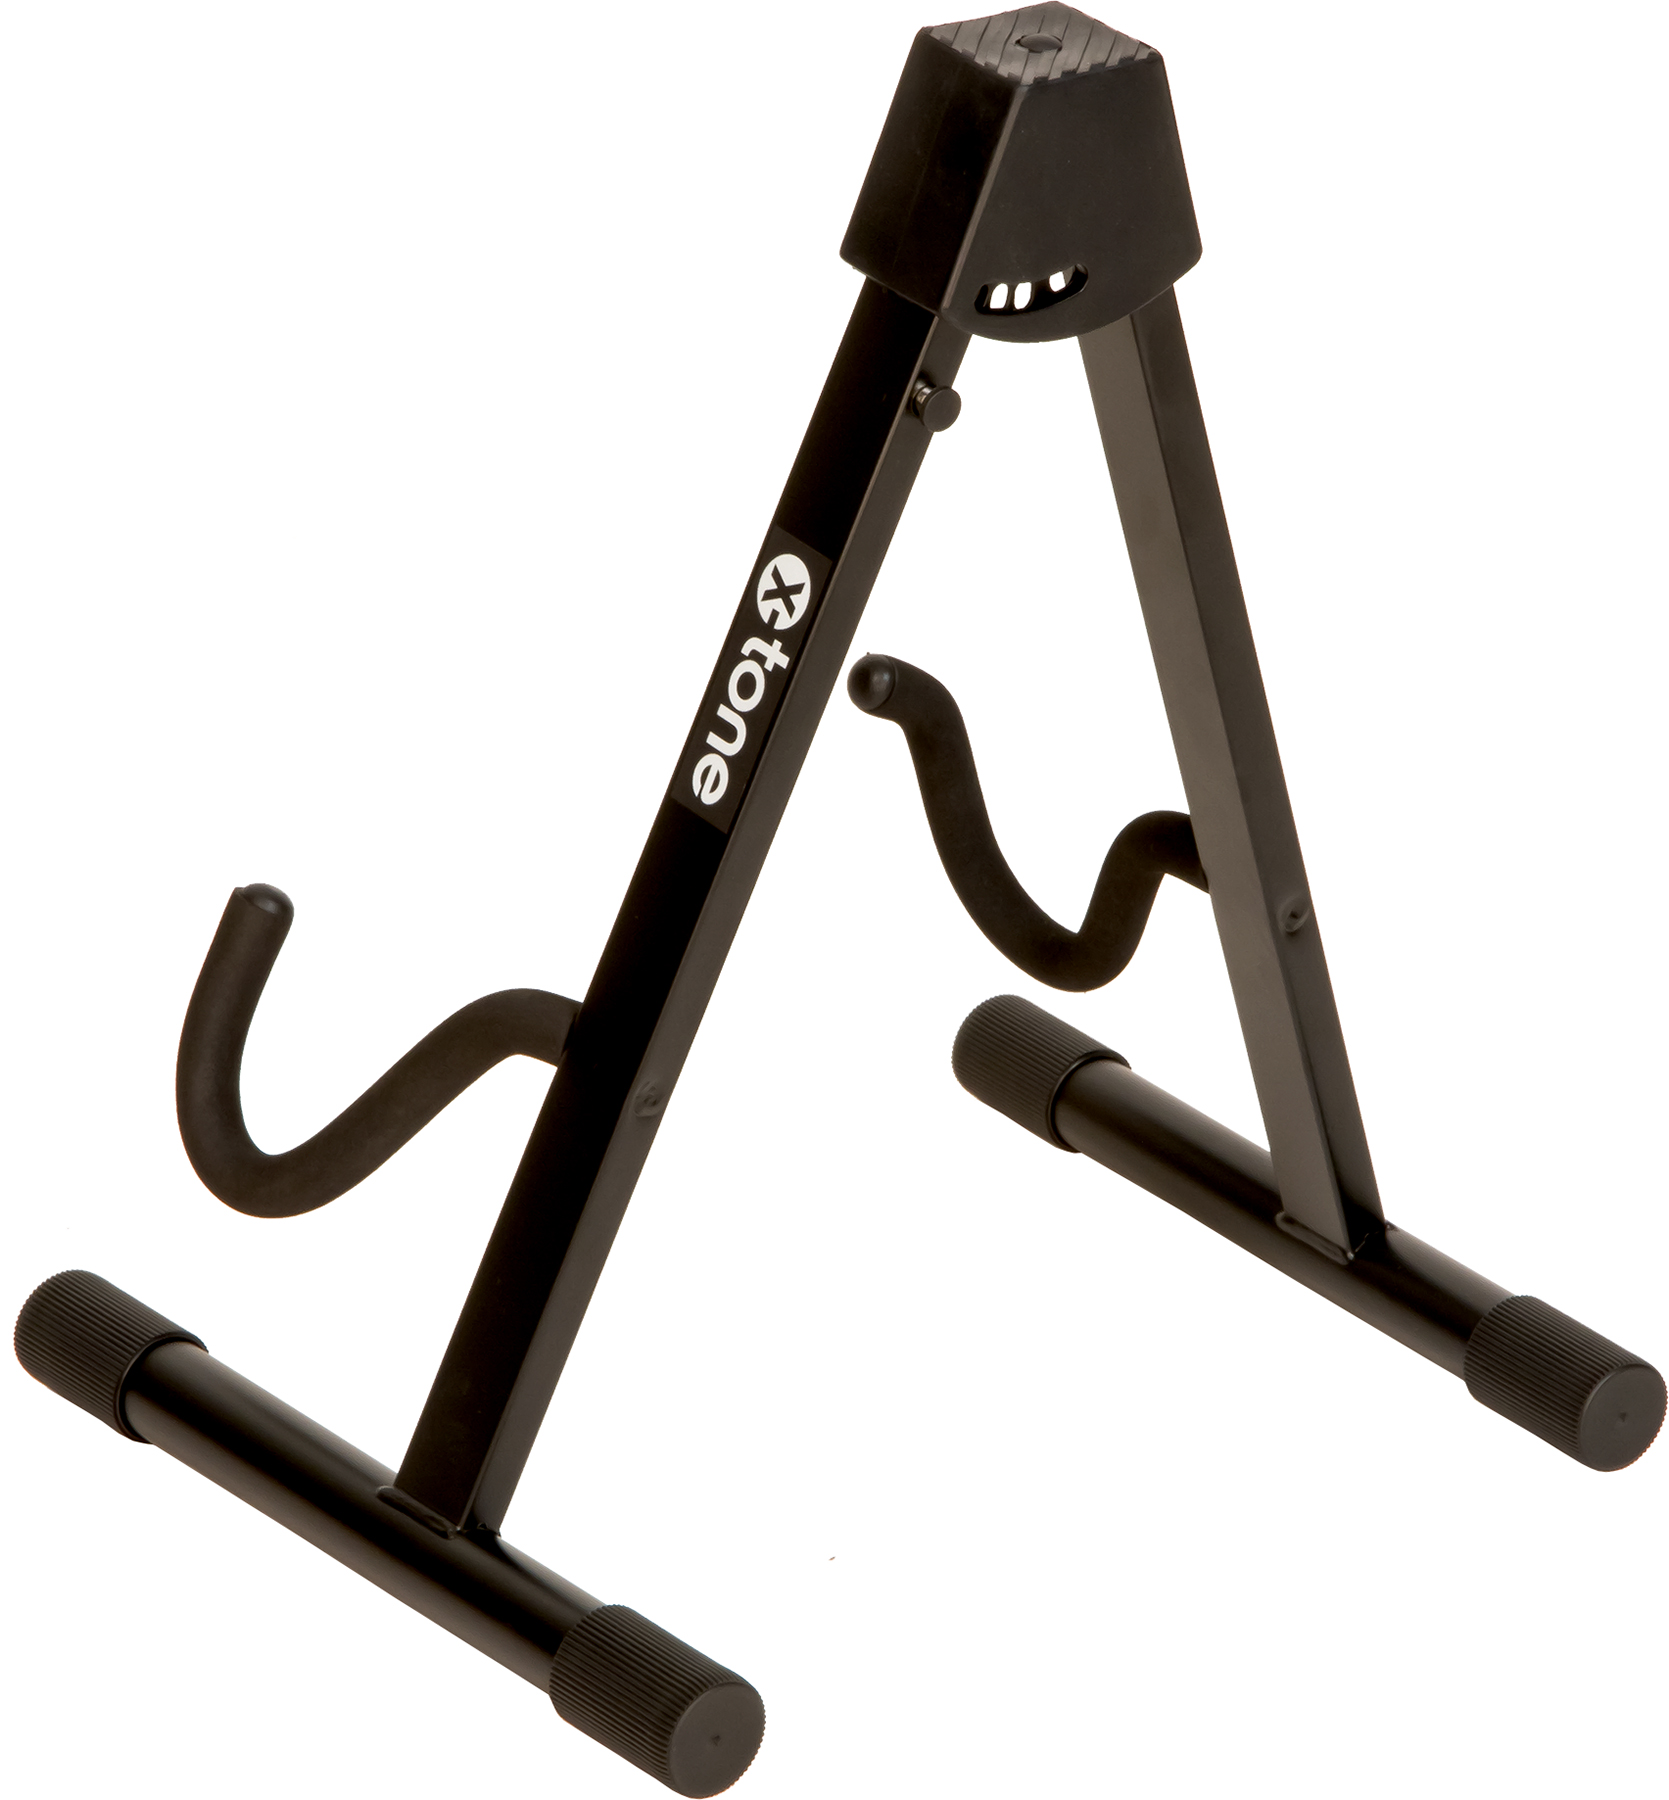 X-tone Xh 6201e Stand Guitare Electrique Sol Pliable - Stand for guitar & bass - Variation 1